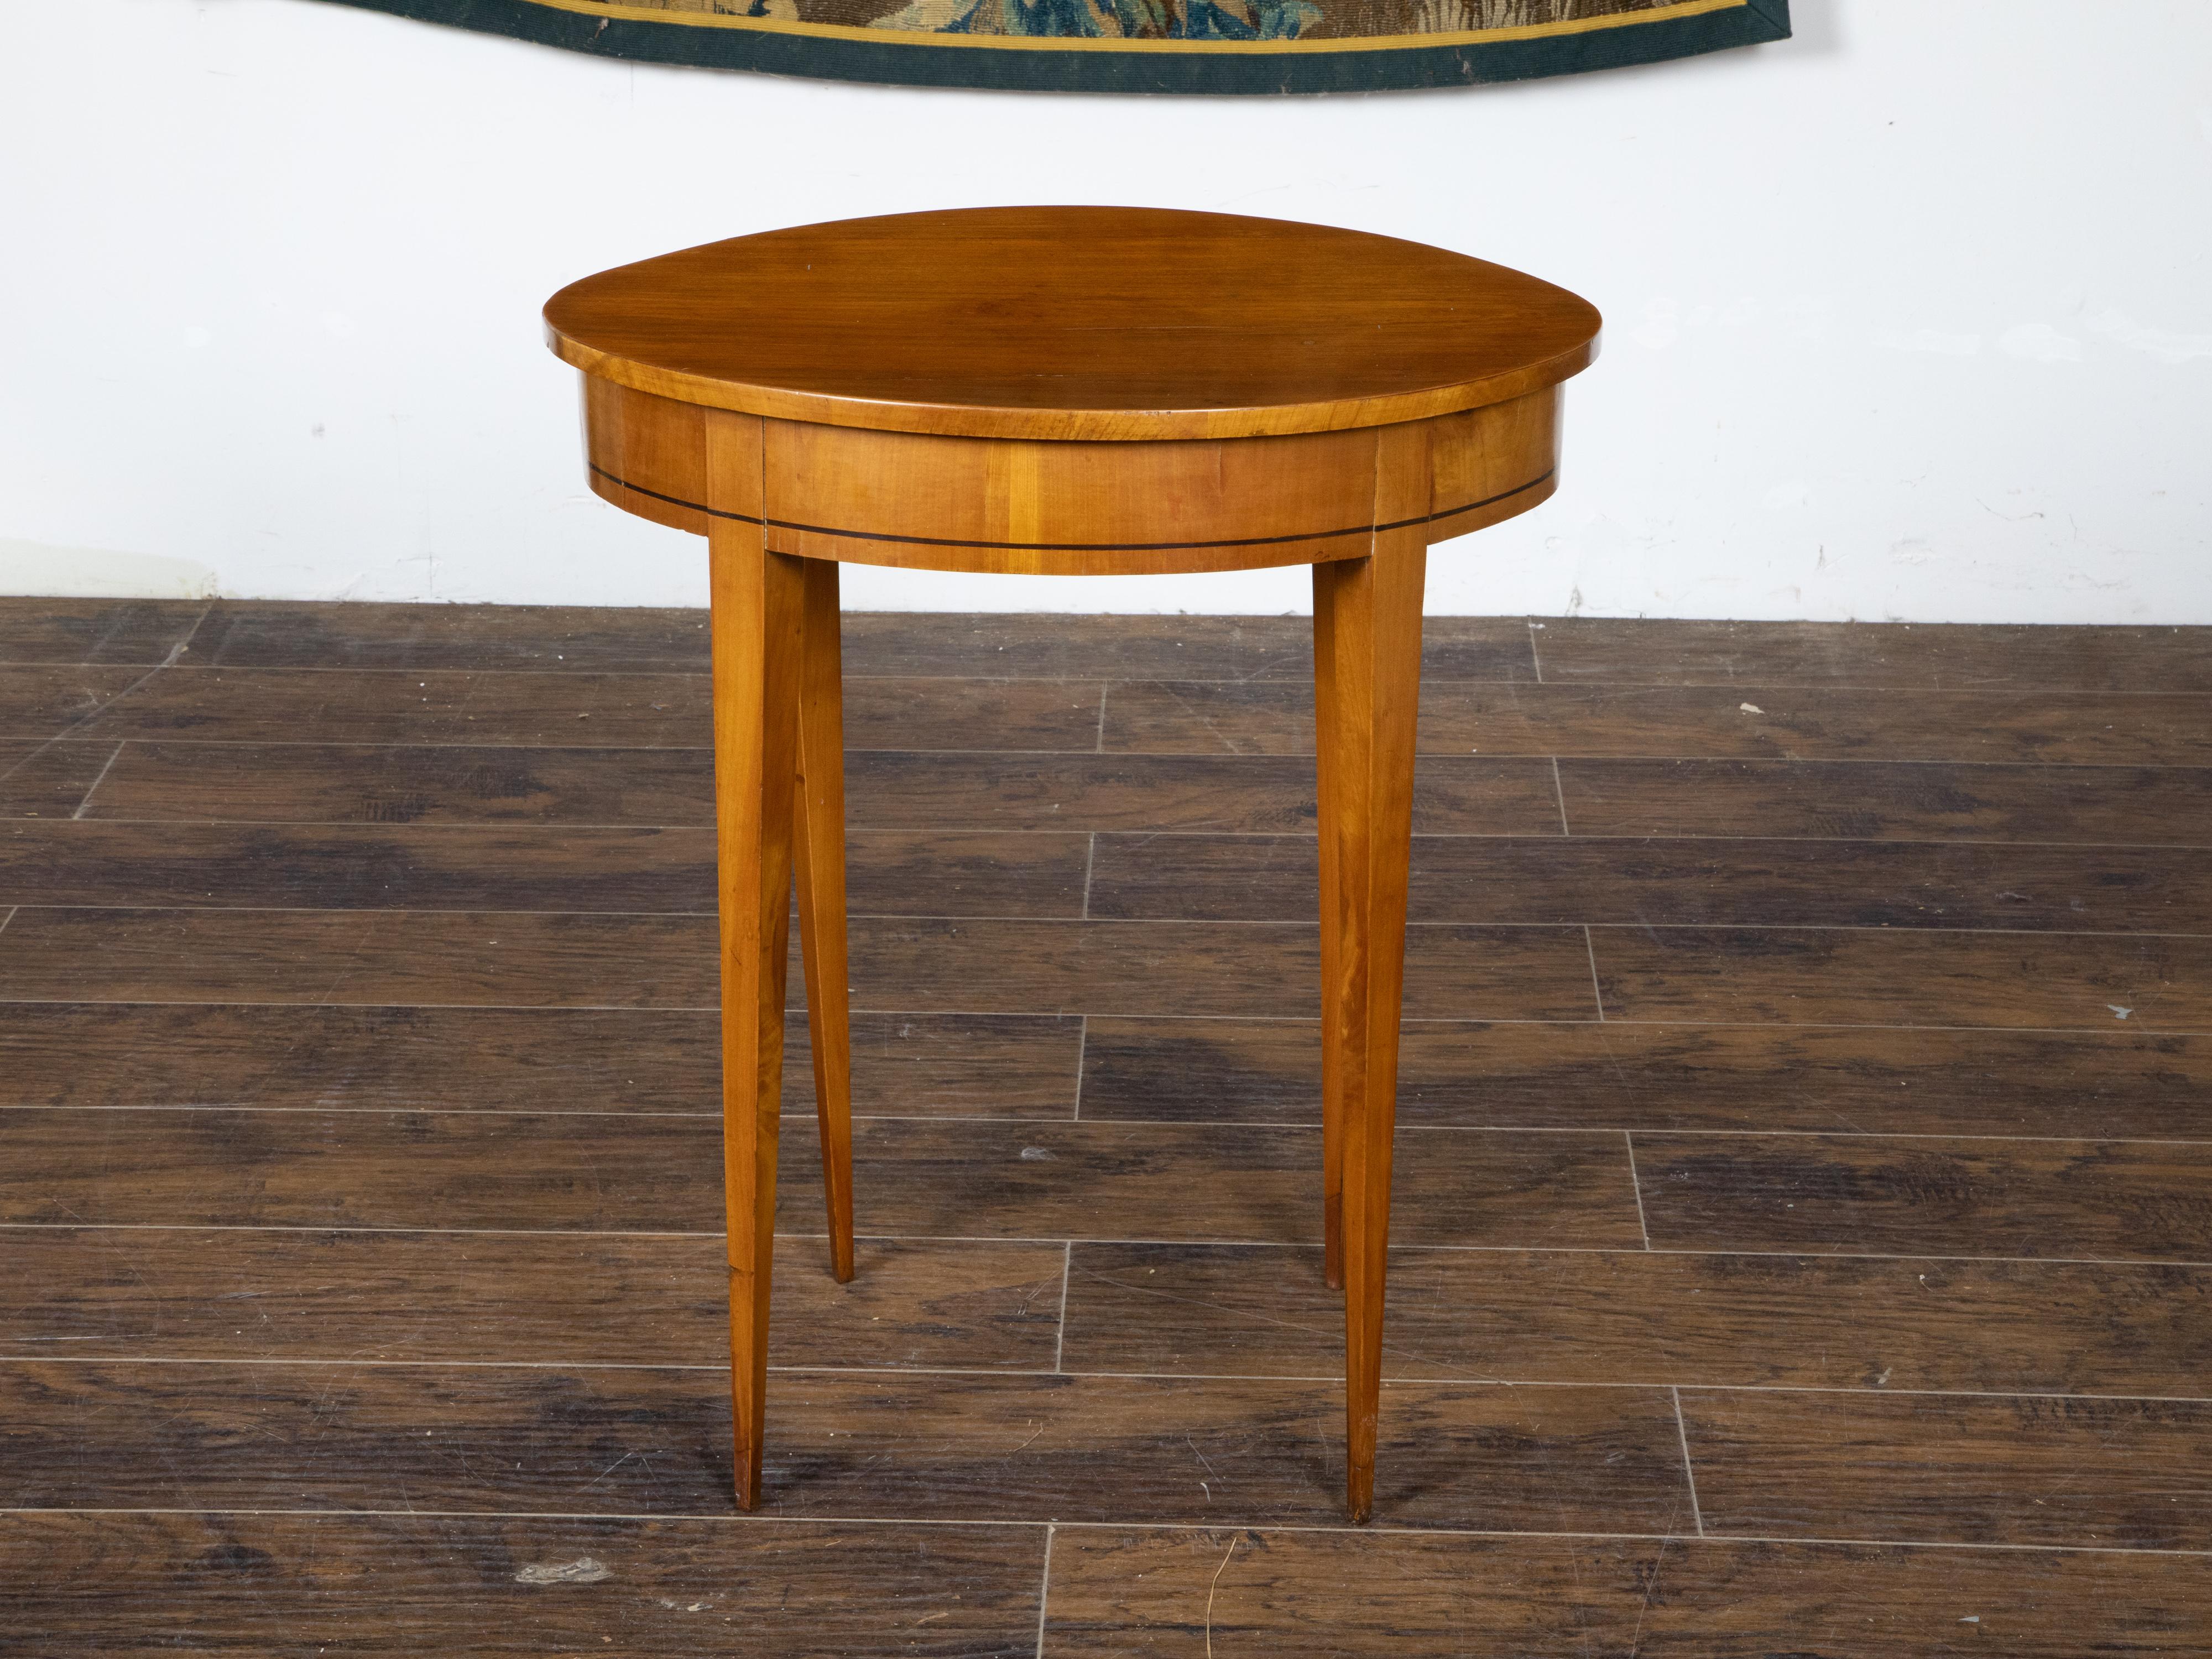 French Neoclassical Style 19th Century Walnut Table with Oval Top, Tapered Legs For Sale 1